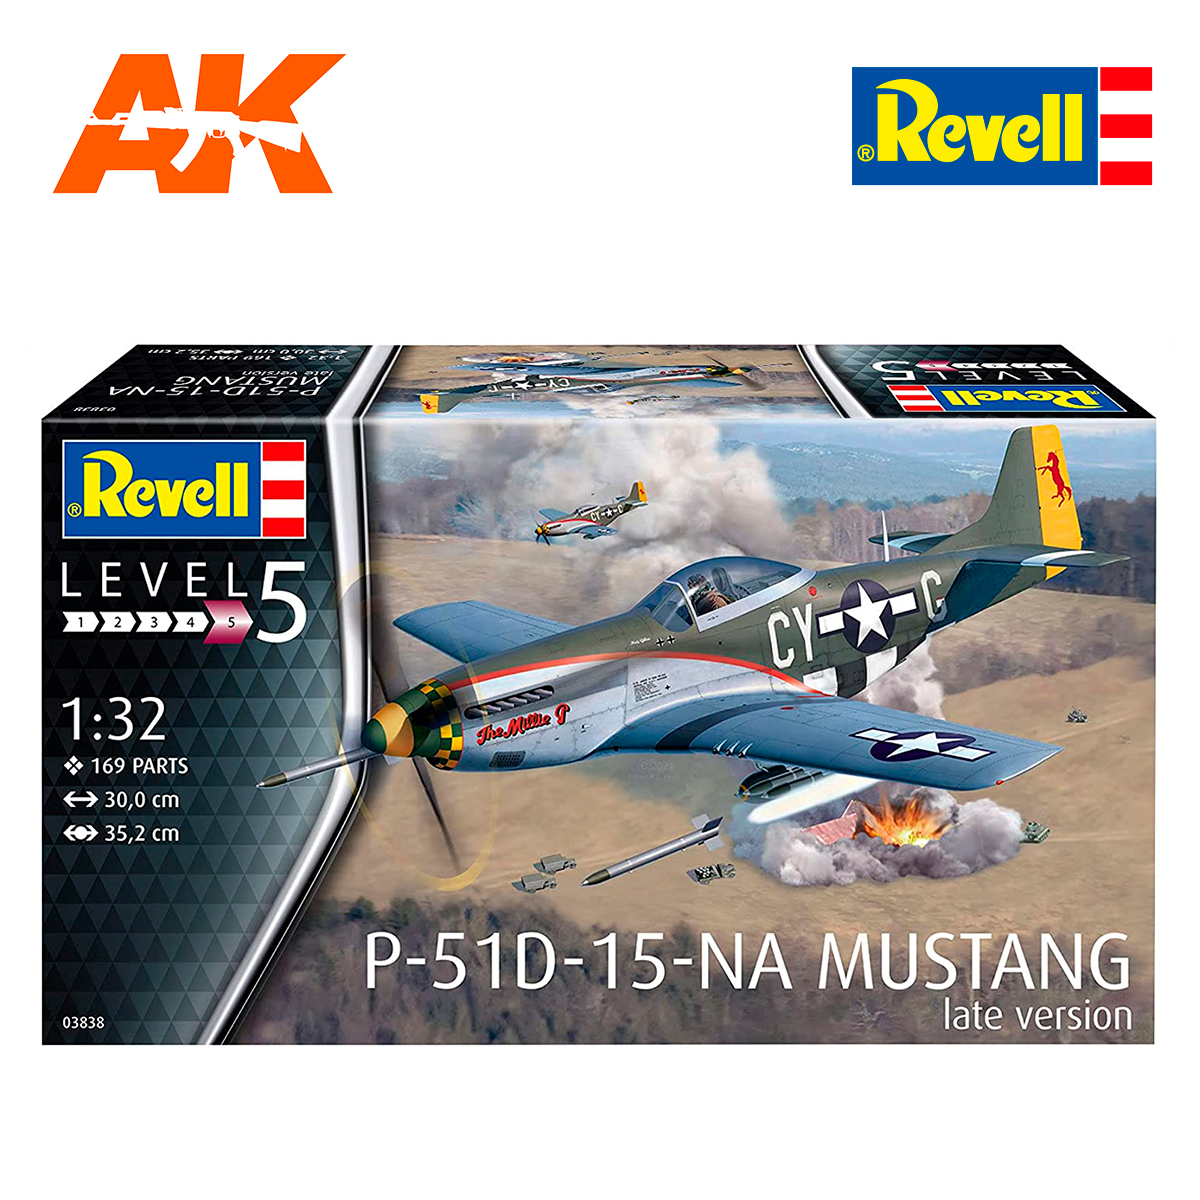 P-51D-15-NA MUSTANG late version 1/32